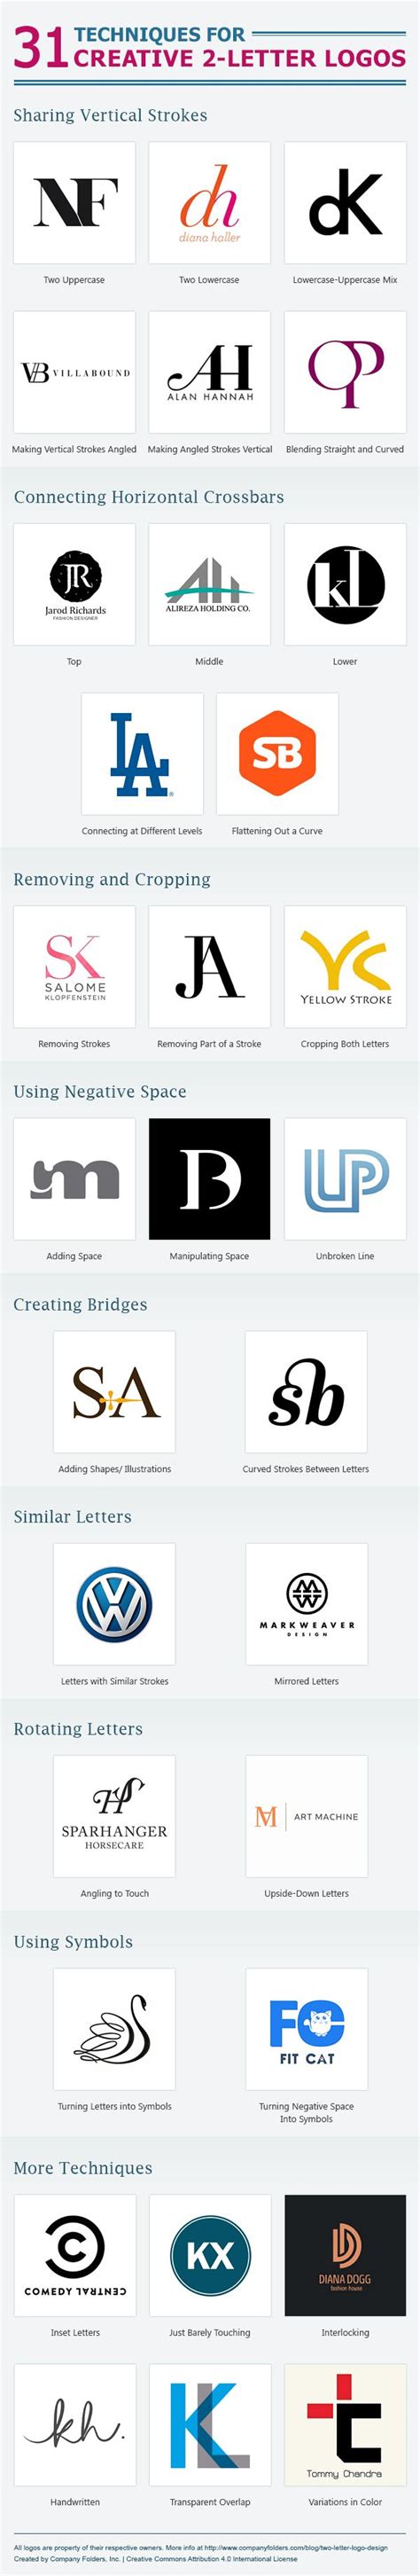 Got A 2 Letter Business Name 31 Ways To Make Your Logo More Creative